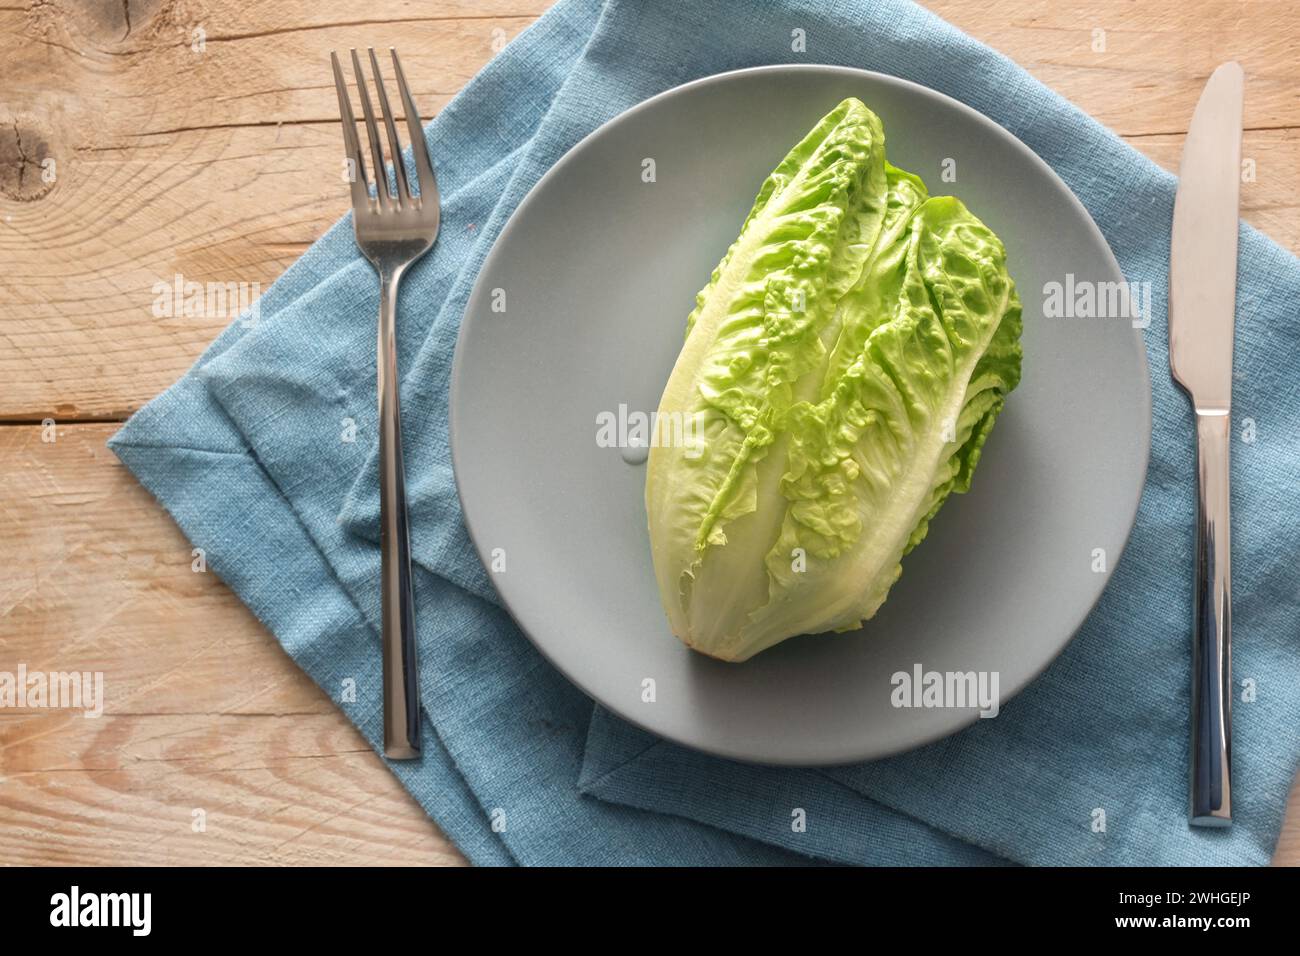 Fresh green lettuce or baby cos on a gray plate with cutlery on a blue napkin and rustic wooden planks, concept for a healthy ve Stock Photo